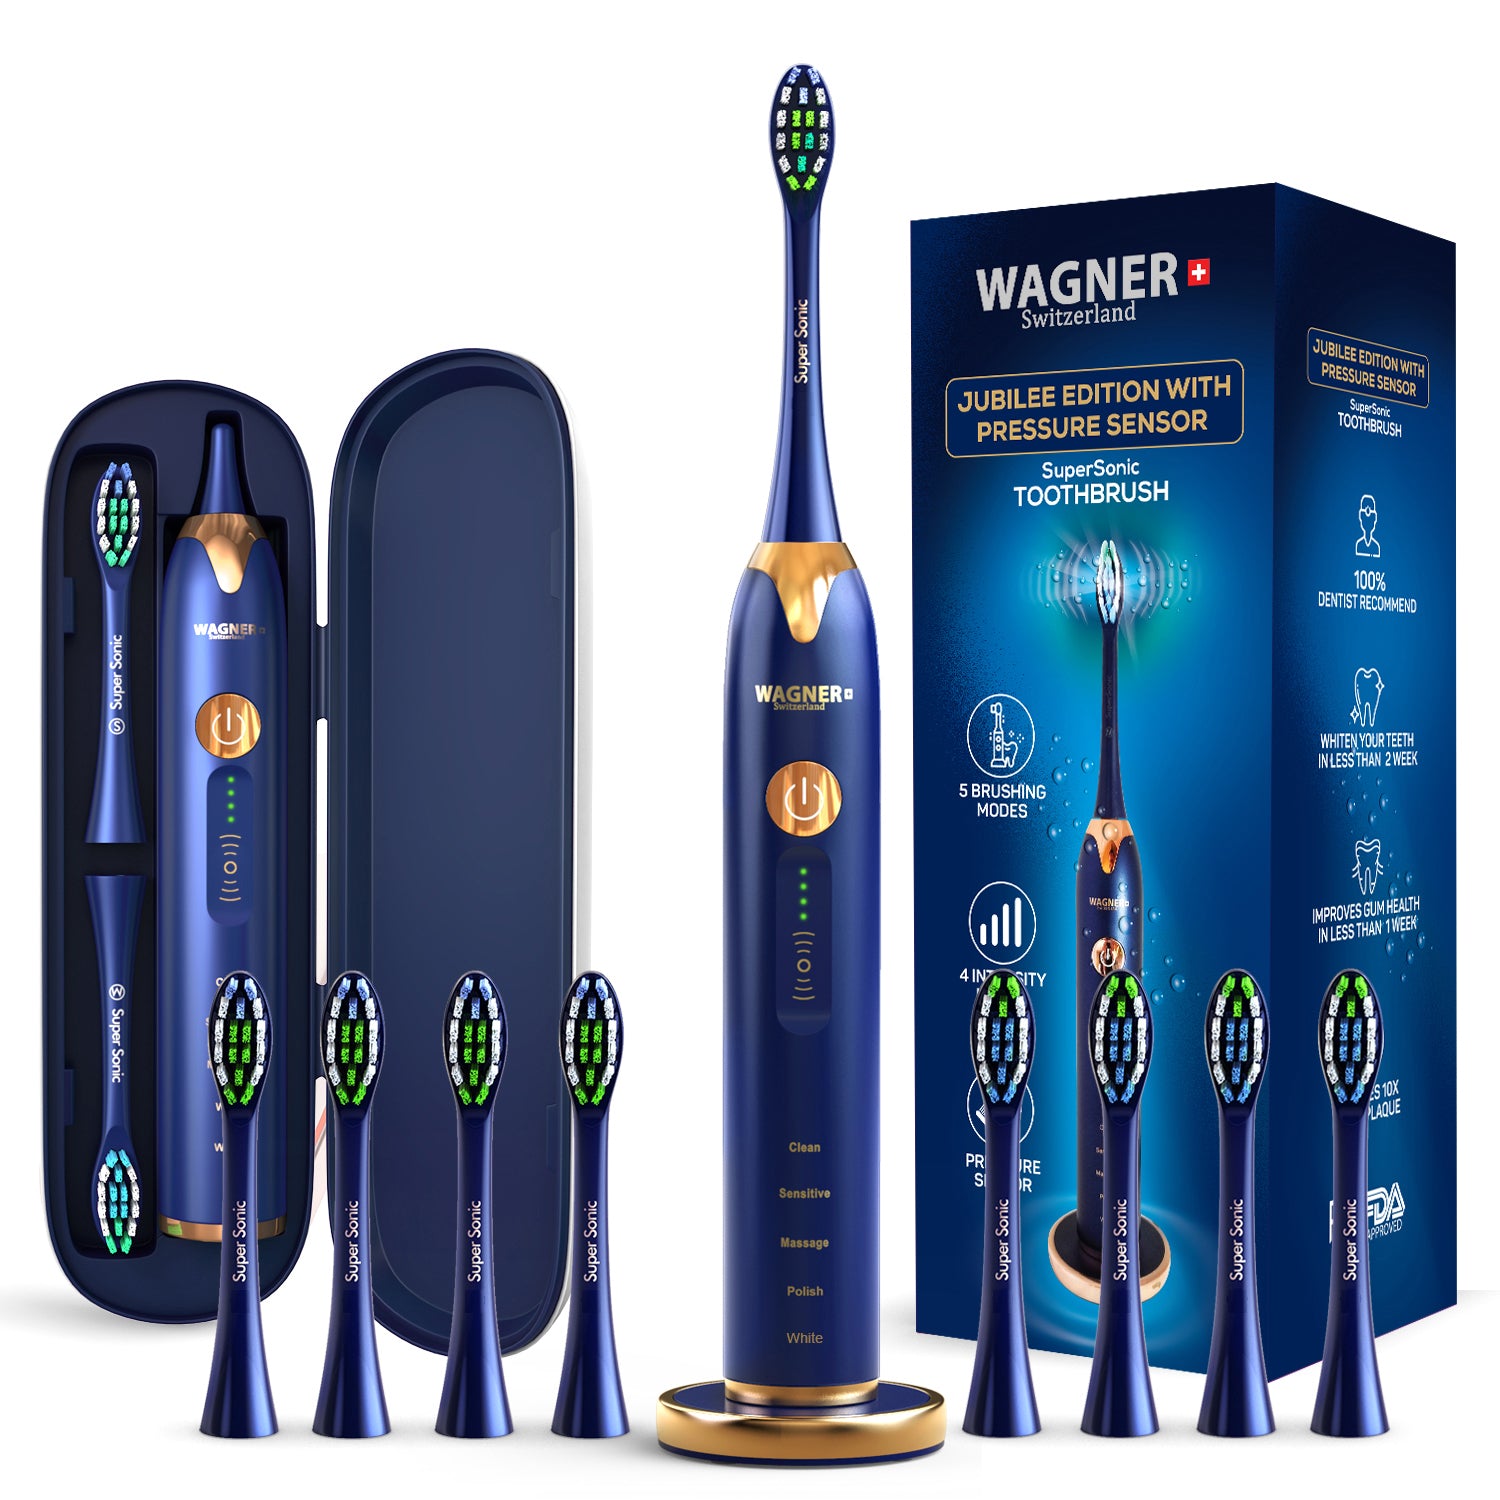 Replacement Toothbrush Brush Heads for Wagner & Stern and Wagner Switzerland toothbrushes.Whiten+ Edition, WT8800 Series and Duette series only. (Black)